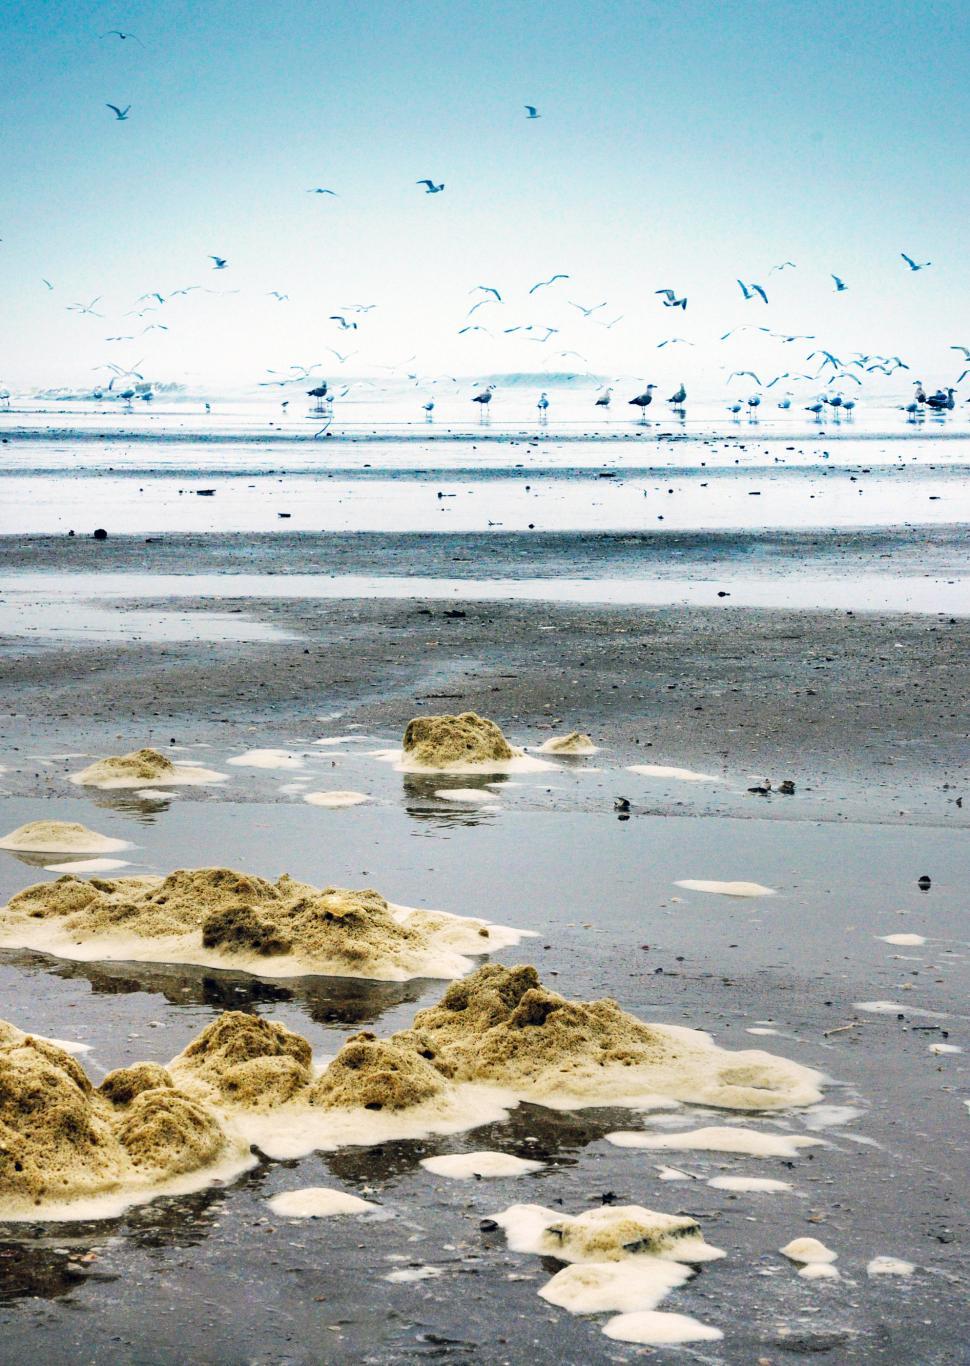 Free Image of a beach with many seagulls  